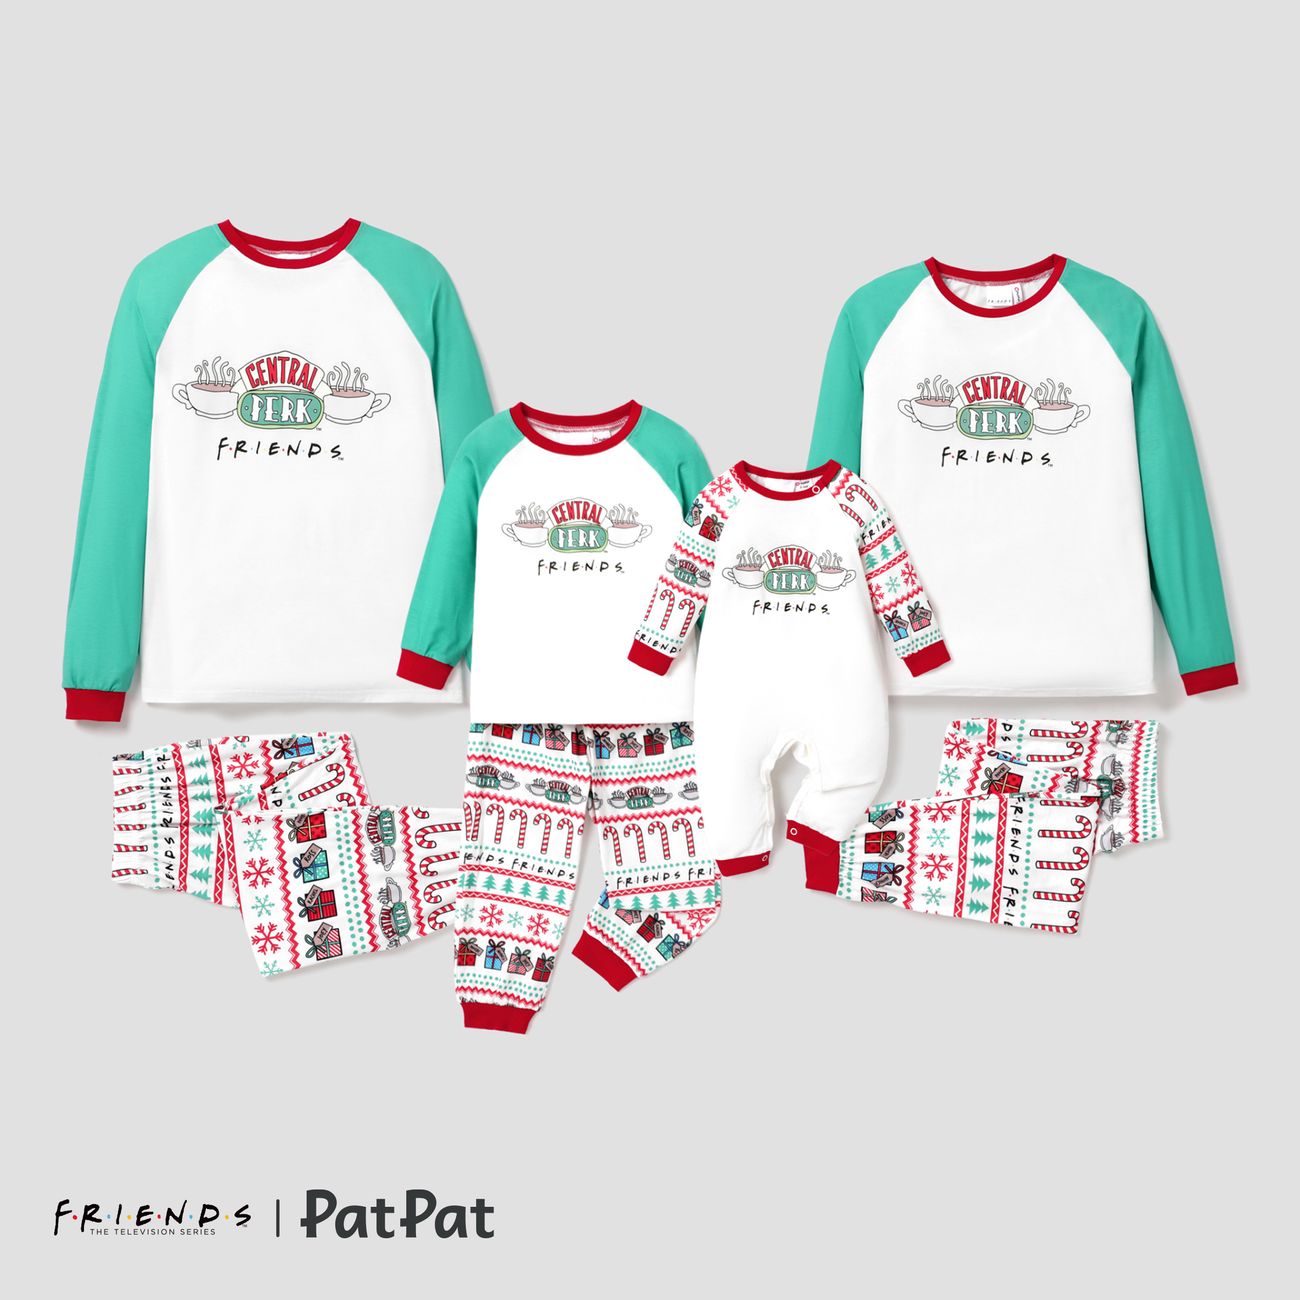 Family Christmas Pajamas 2021 | Merry Christmas Family Pjs With Dog For  Sale - The Wholesale T-Shirts By VinCo